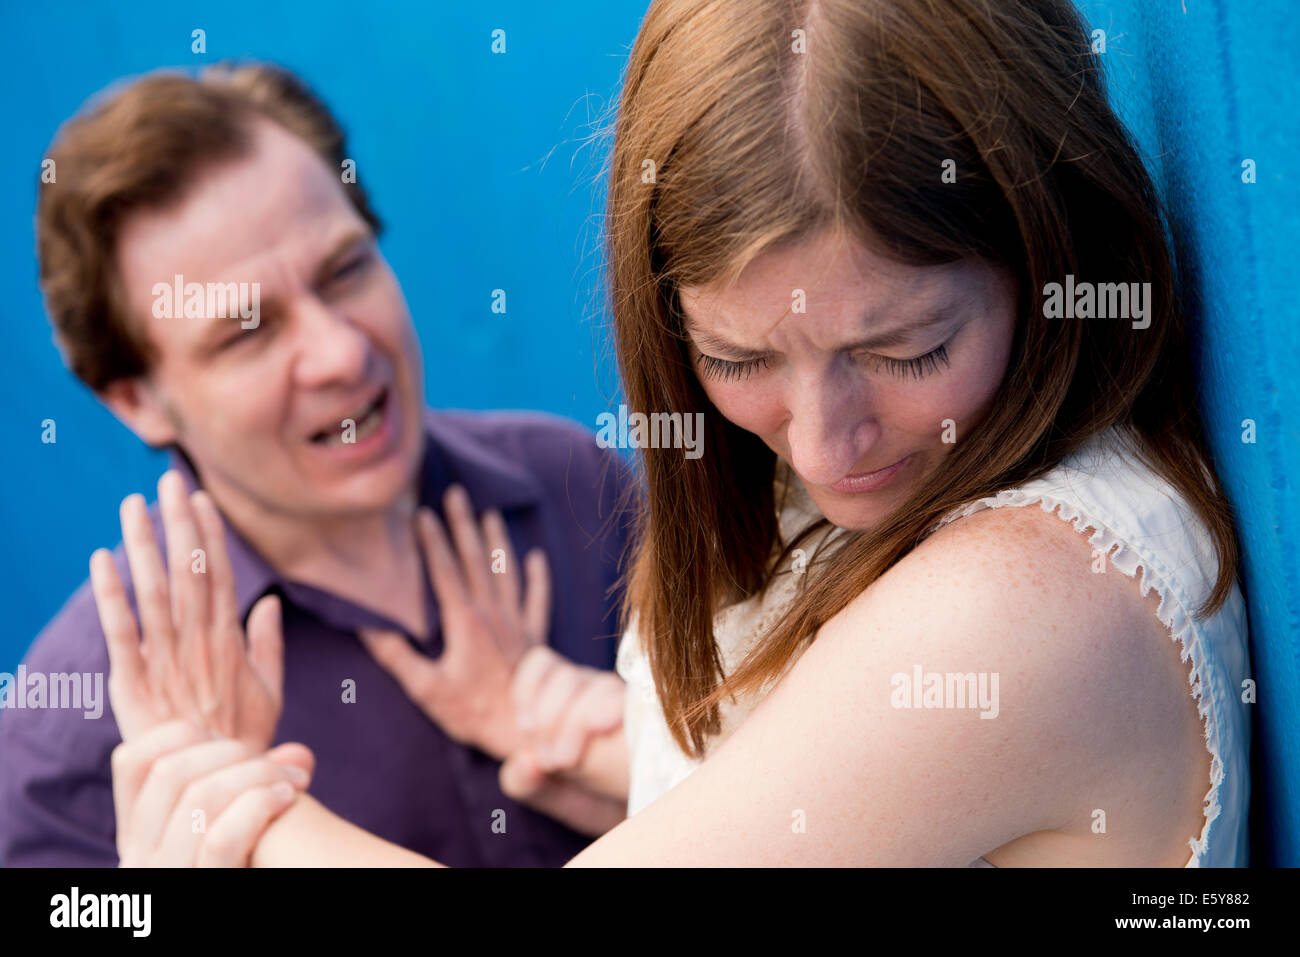 Aggressive man displaying violent behaviour and verbal abuse towards a helpless woman. Stock Photo